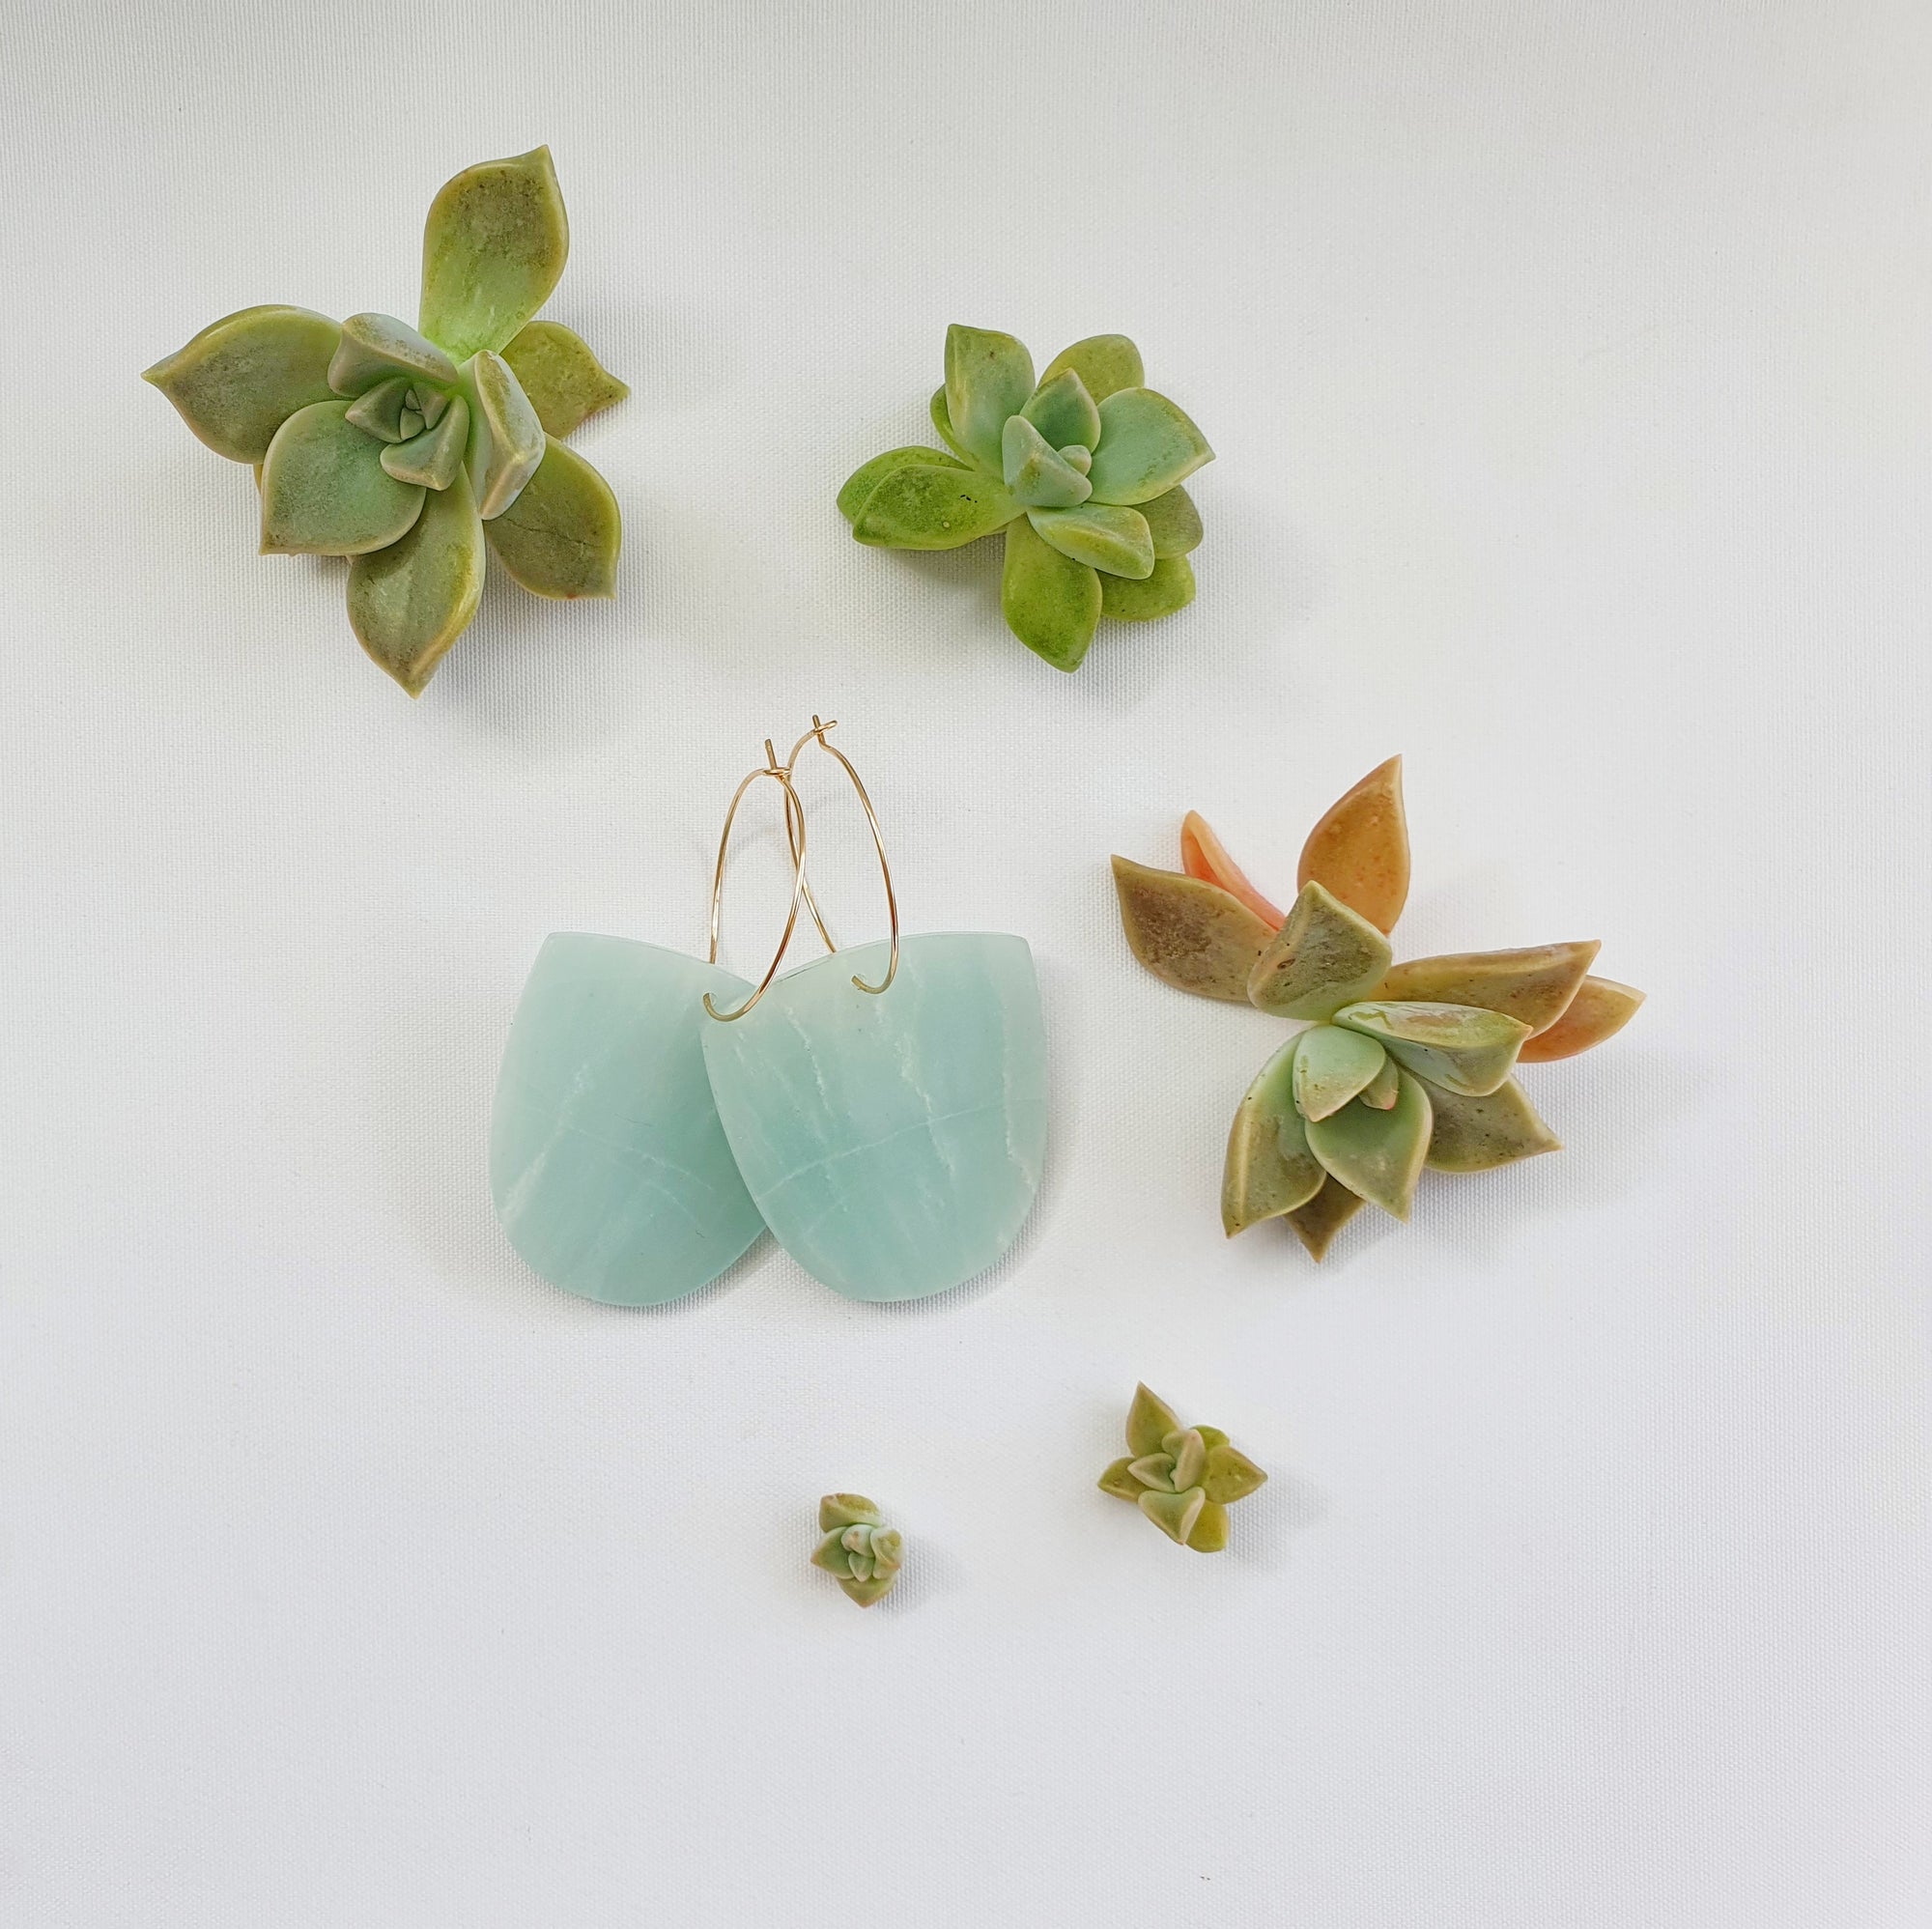 NEWS- Limited Edition Amazonite Earrings Are Here!